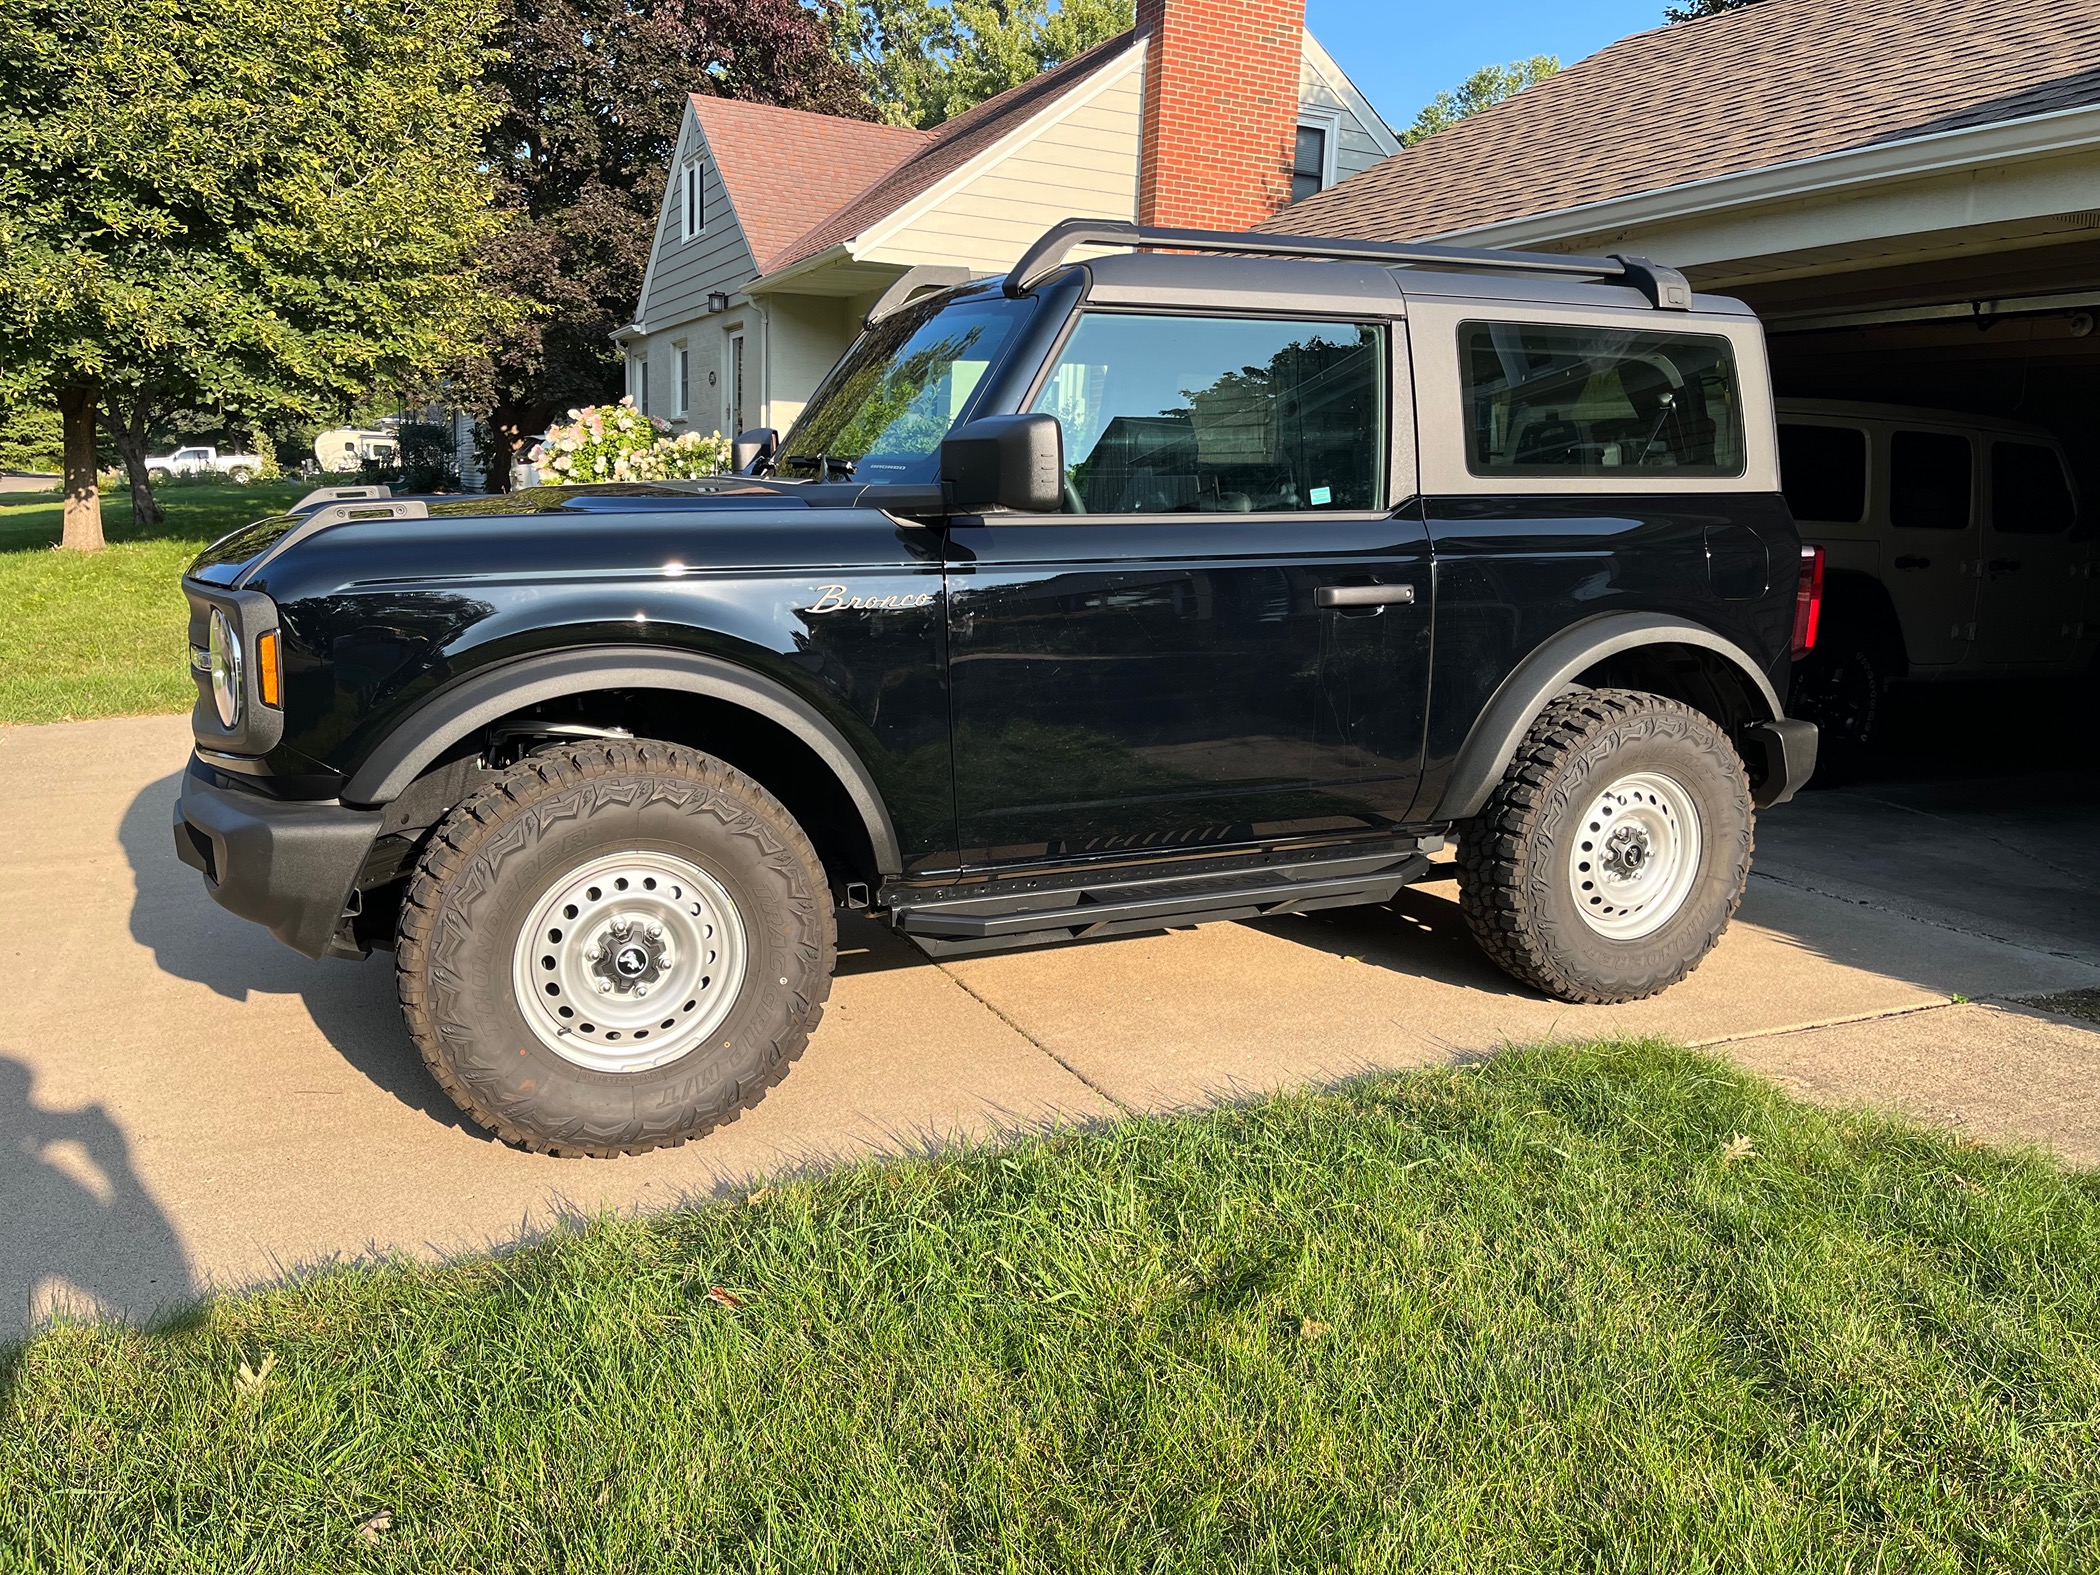 Ford Bronco Resale Question: What is my Bronco really worth? 71512897087__255EBF80-8701-40FD-A5A7-D629F5DE9321